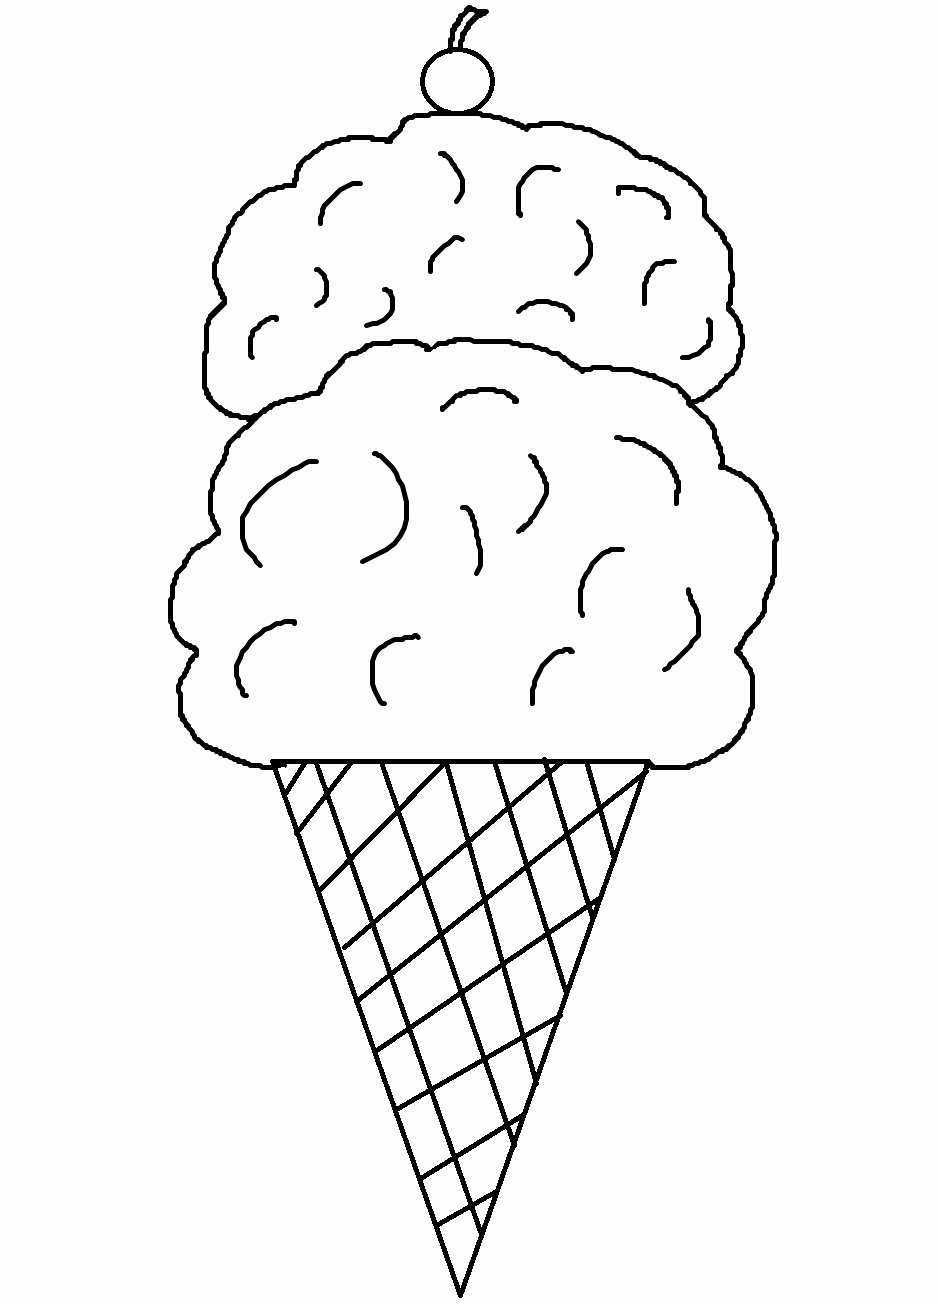 Ice Cream Scoops Coloring Pages - Coloring Home